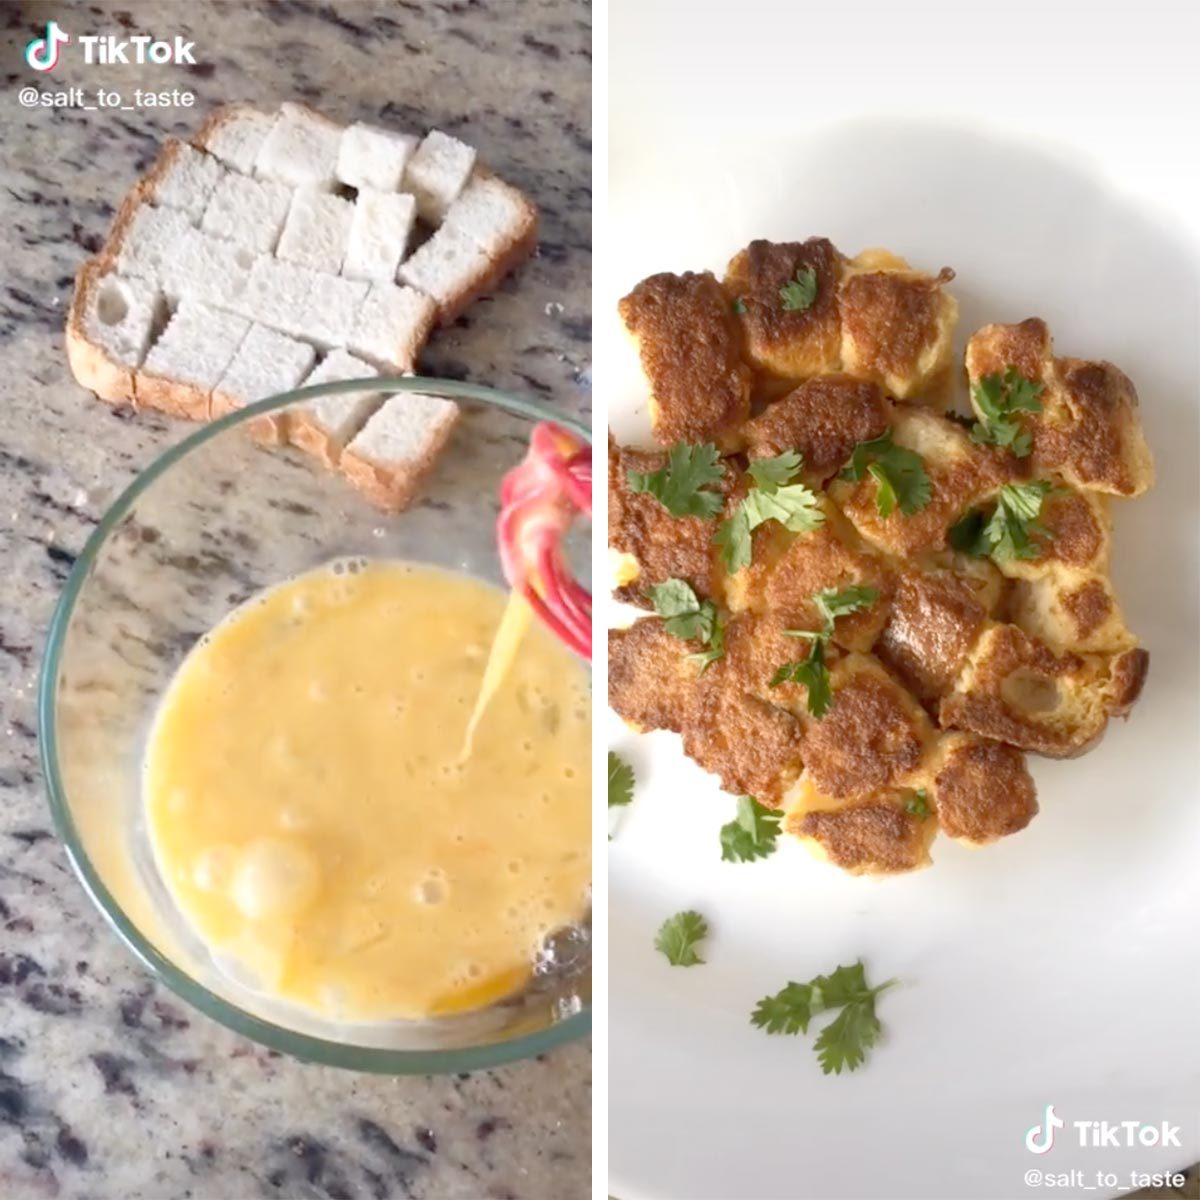 74 Viral TikTok Recipes You Need to Try